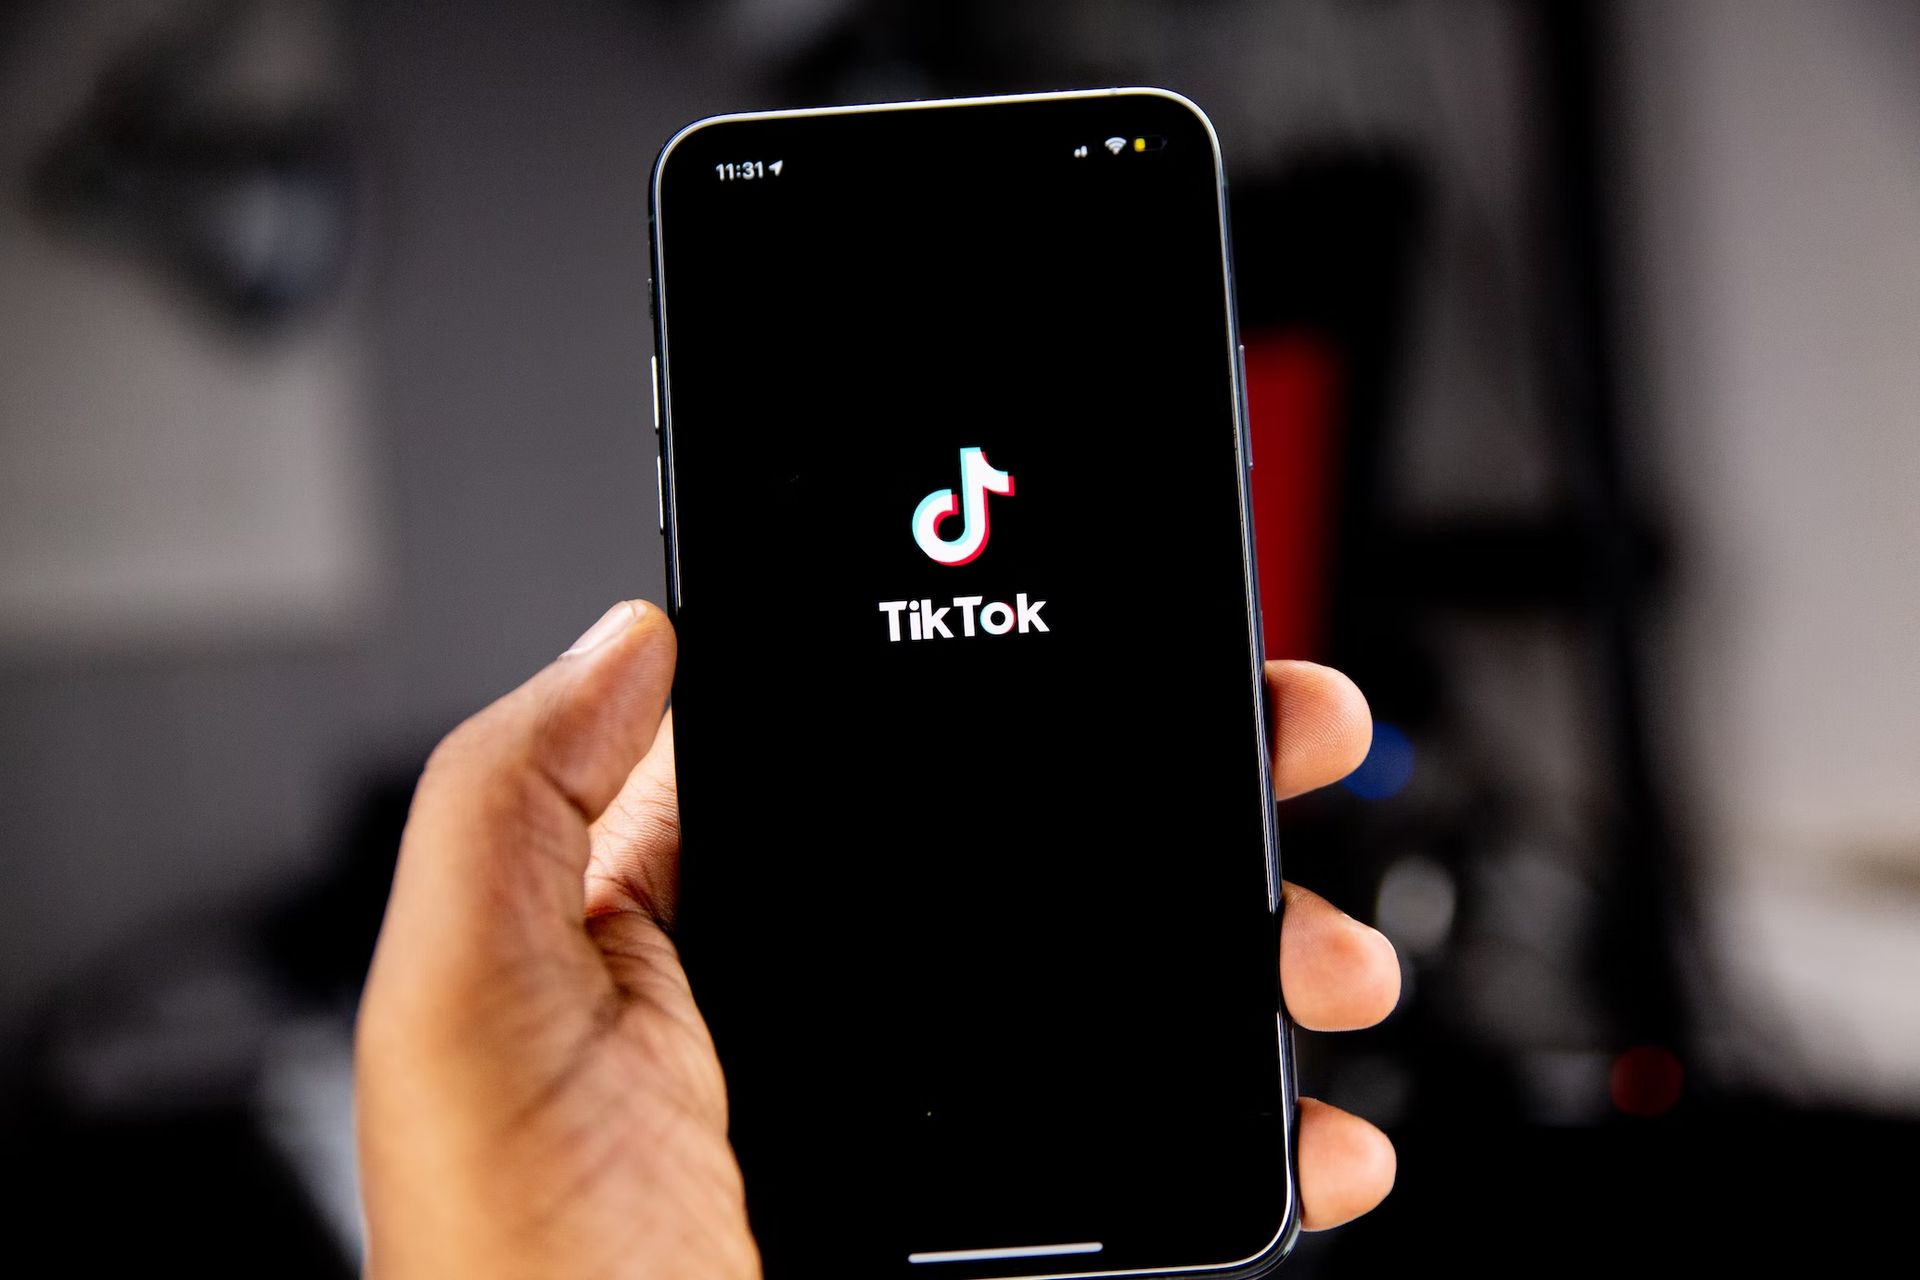 How to turn on and turn off activity status on TikTok?